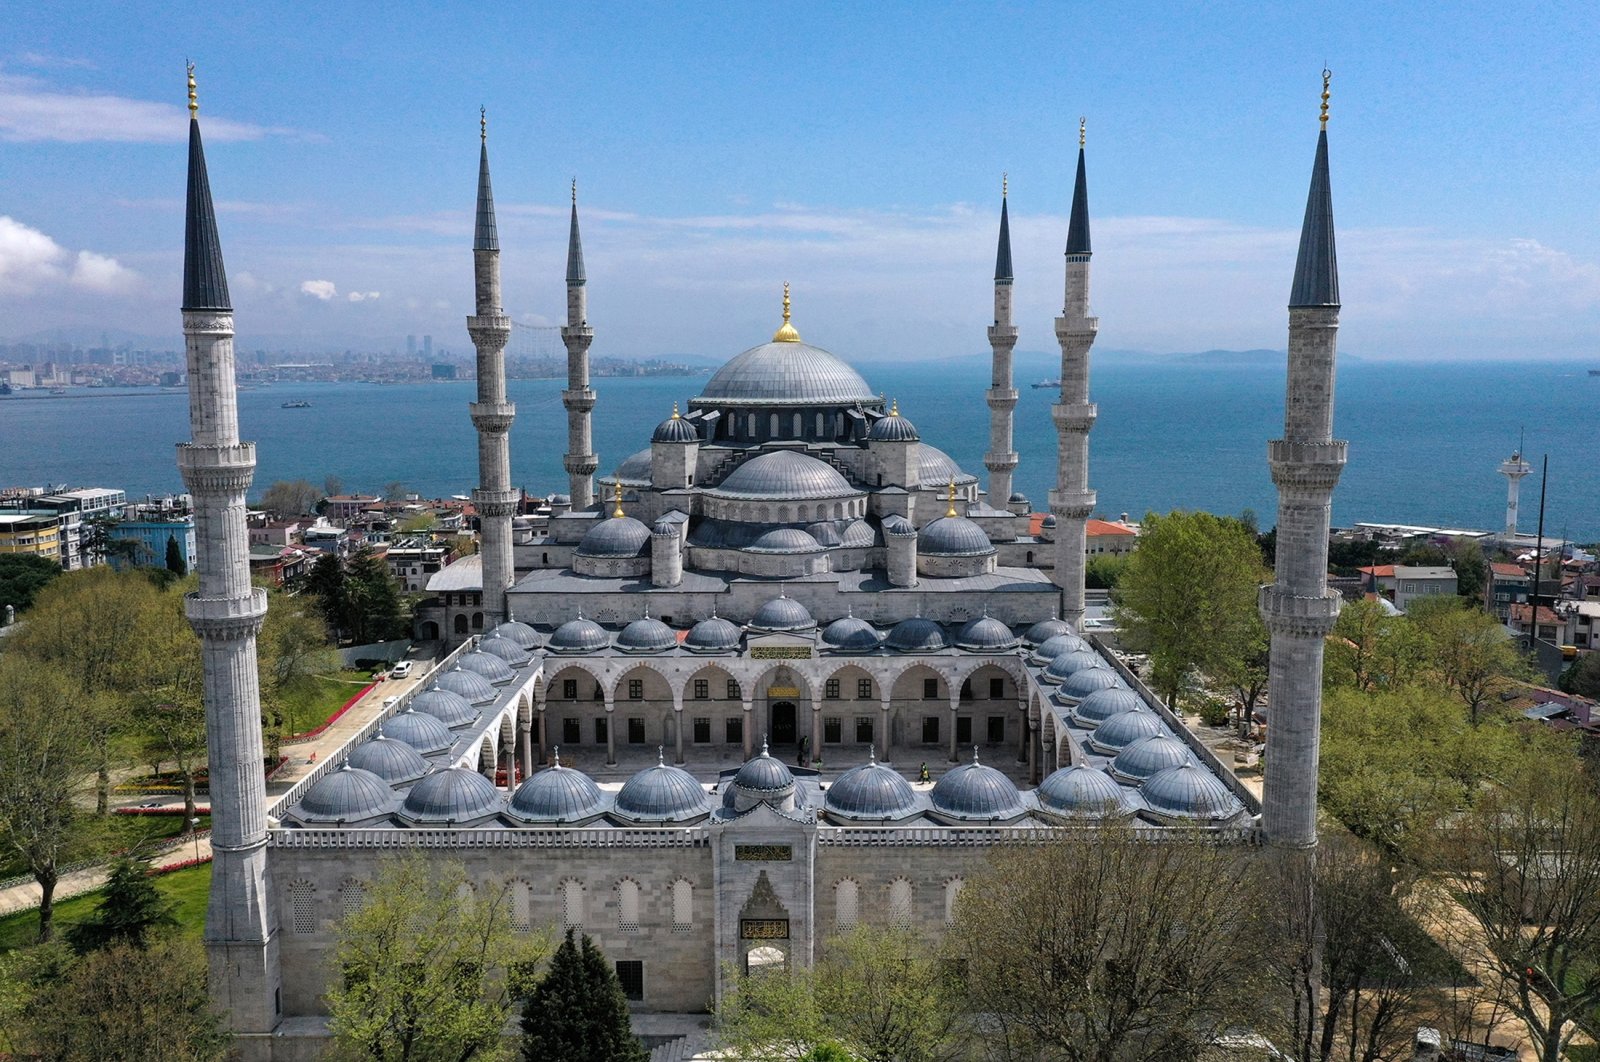 Erdo?an reopens iconic Blue Mosque after 5-year restoration | Daily Sabah